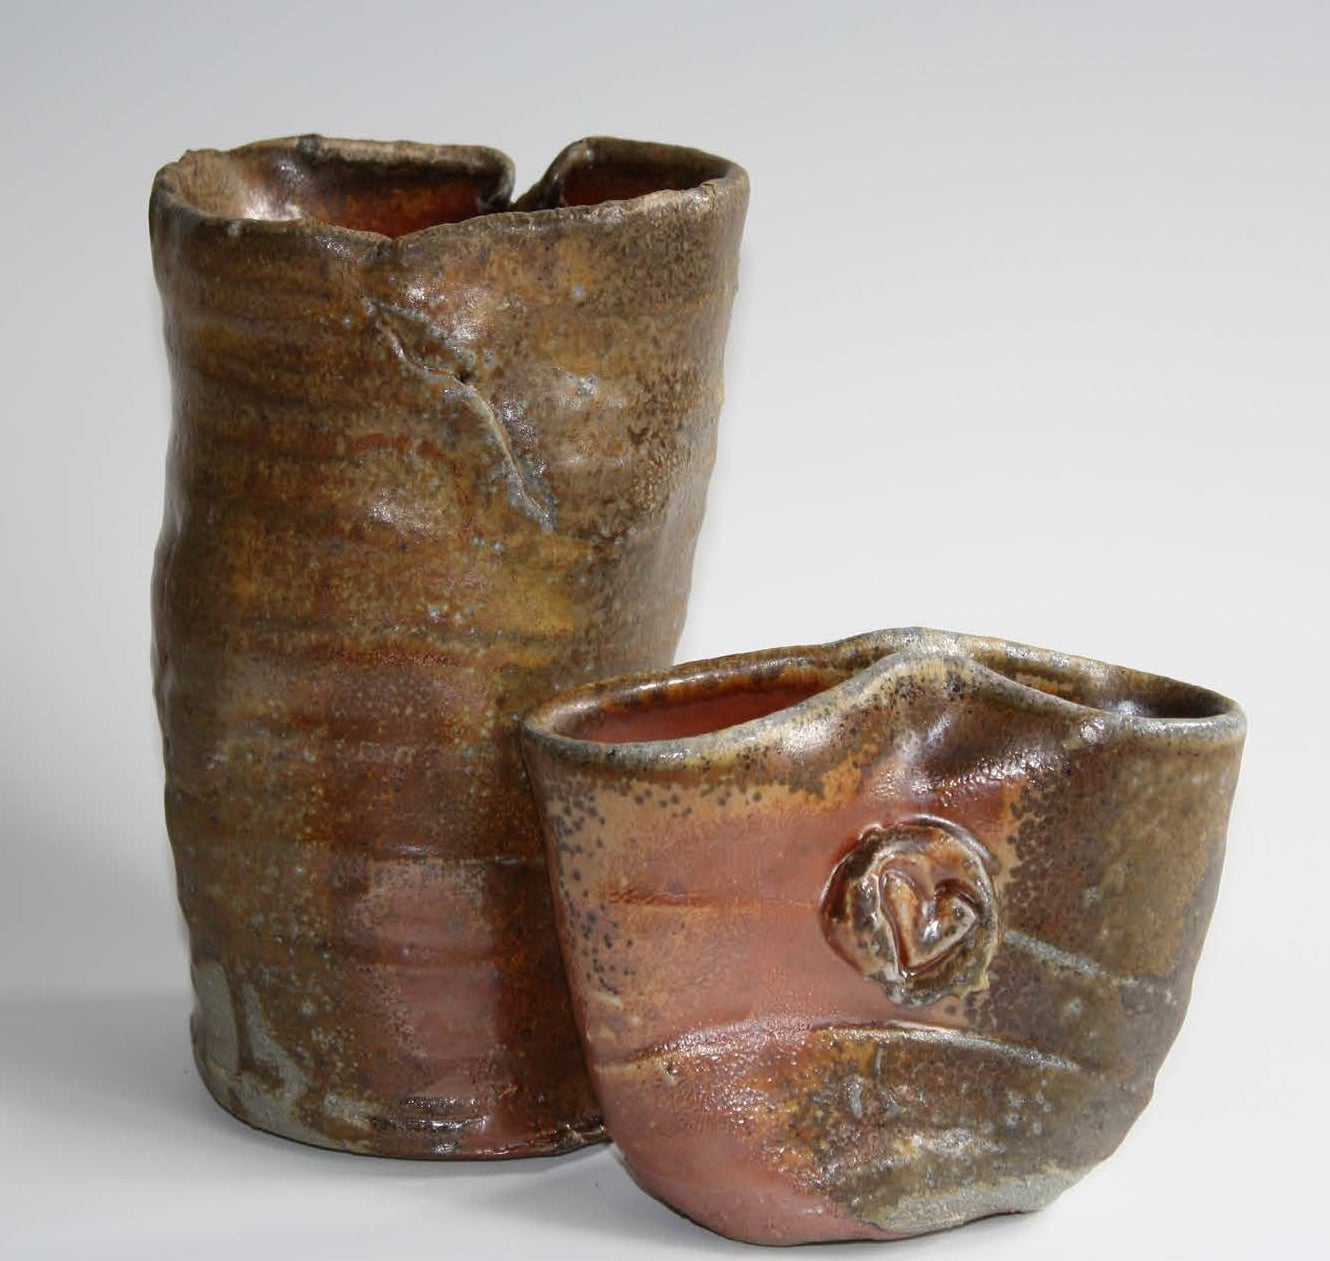 Torn, pottery by Alison Robinson-Widmer